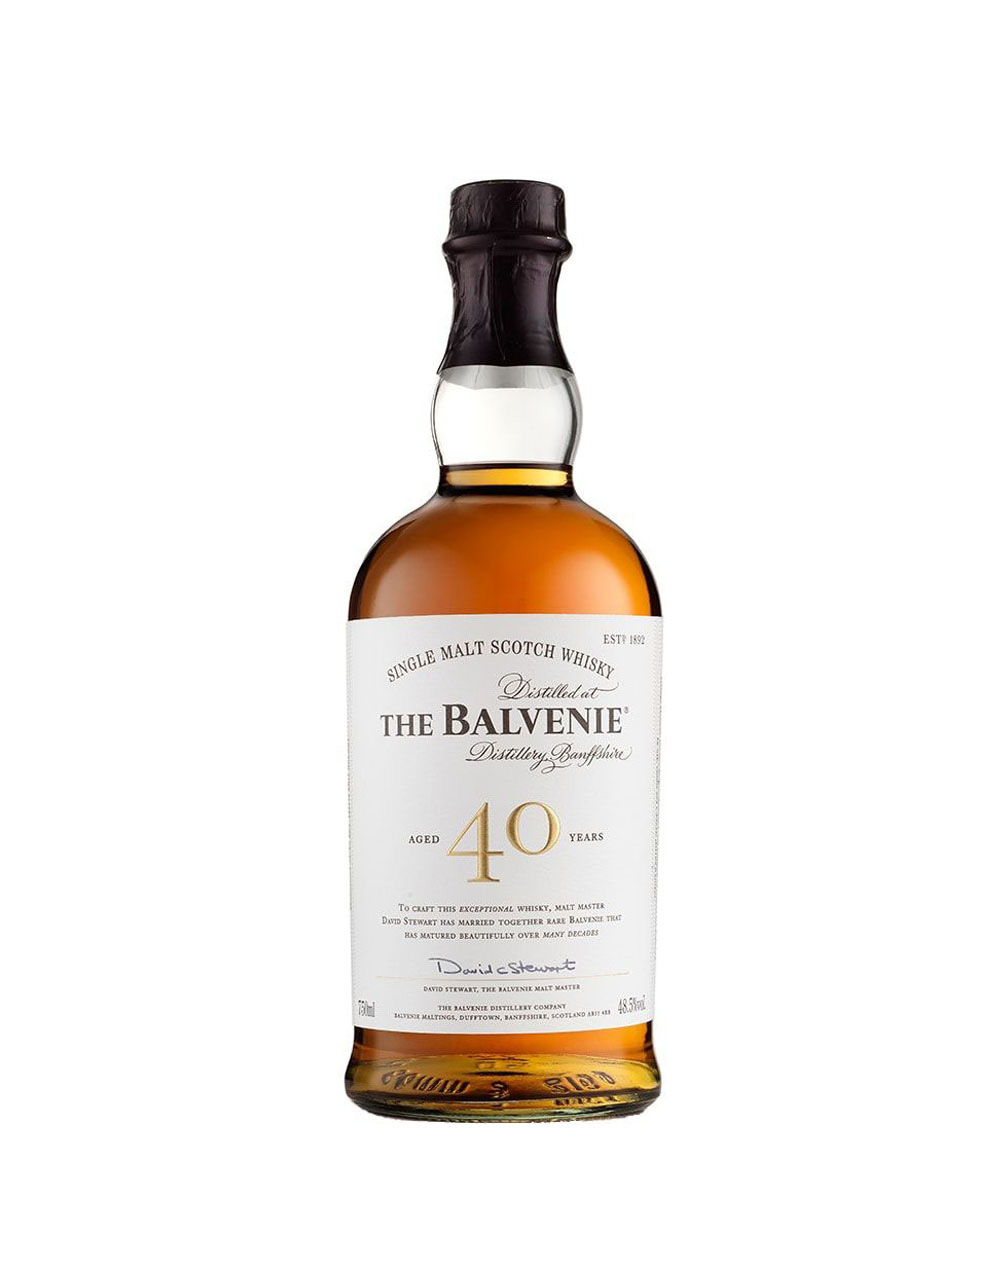 The Balvenie Forty Aged 40 Years